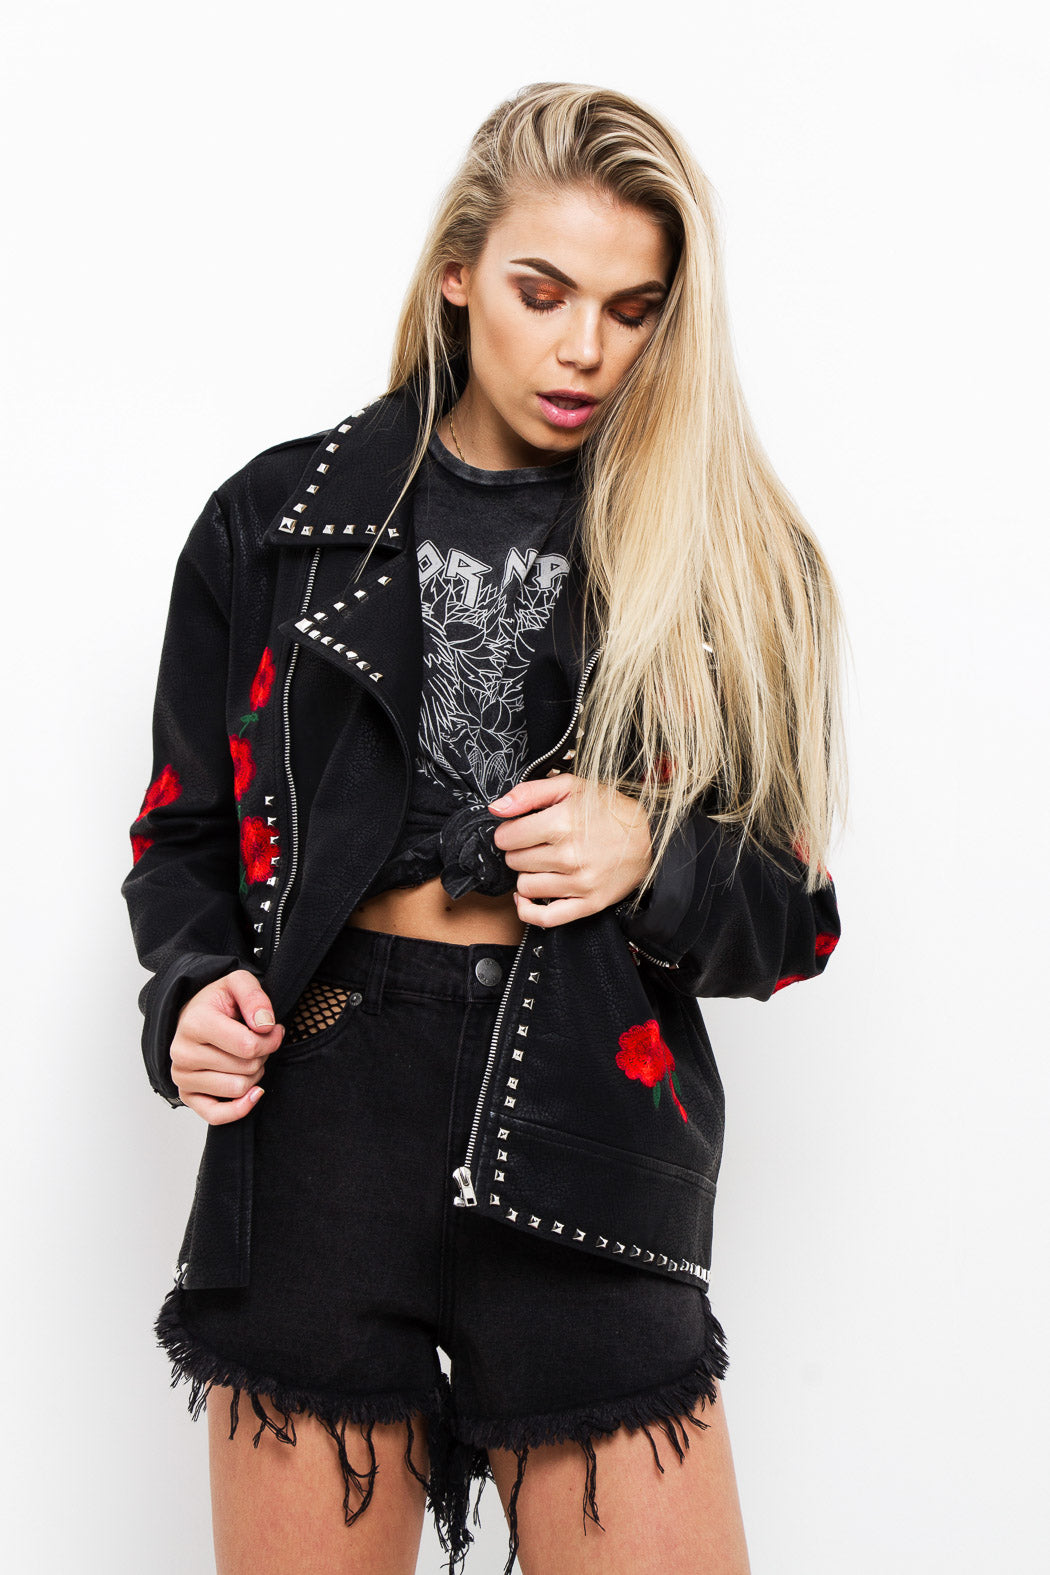 "Roses Are Red" Embroidered Studded PU Jacket